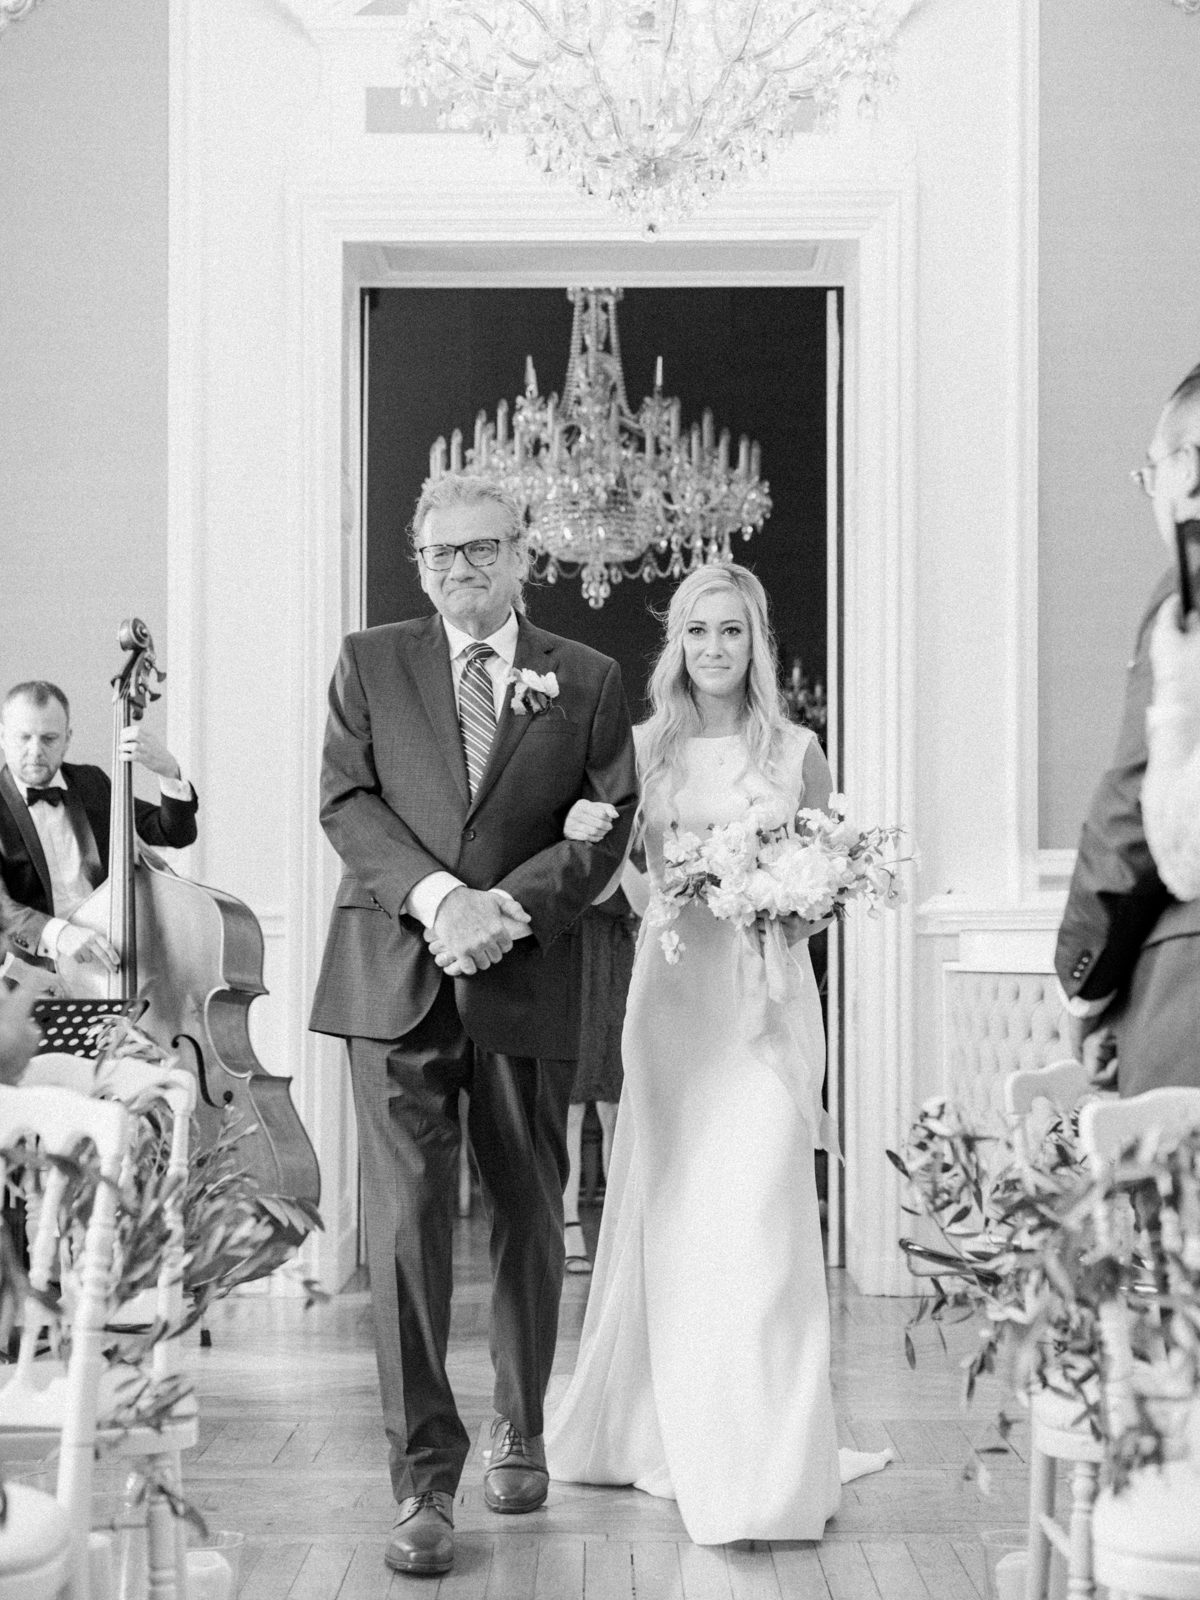 Chateau Bouffemont Wedding Photography | Paris, France Destination Wedding | Molly Carr Photography | Fine Art Film Photography | Jennifer Fox Weddings | Ceremony With Floral Arch by Floraison | Bride Walking Down Aisle